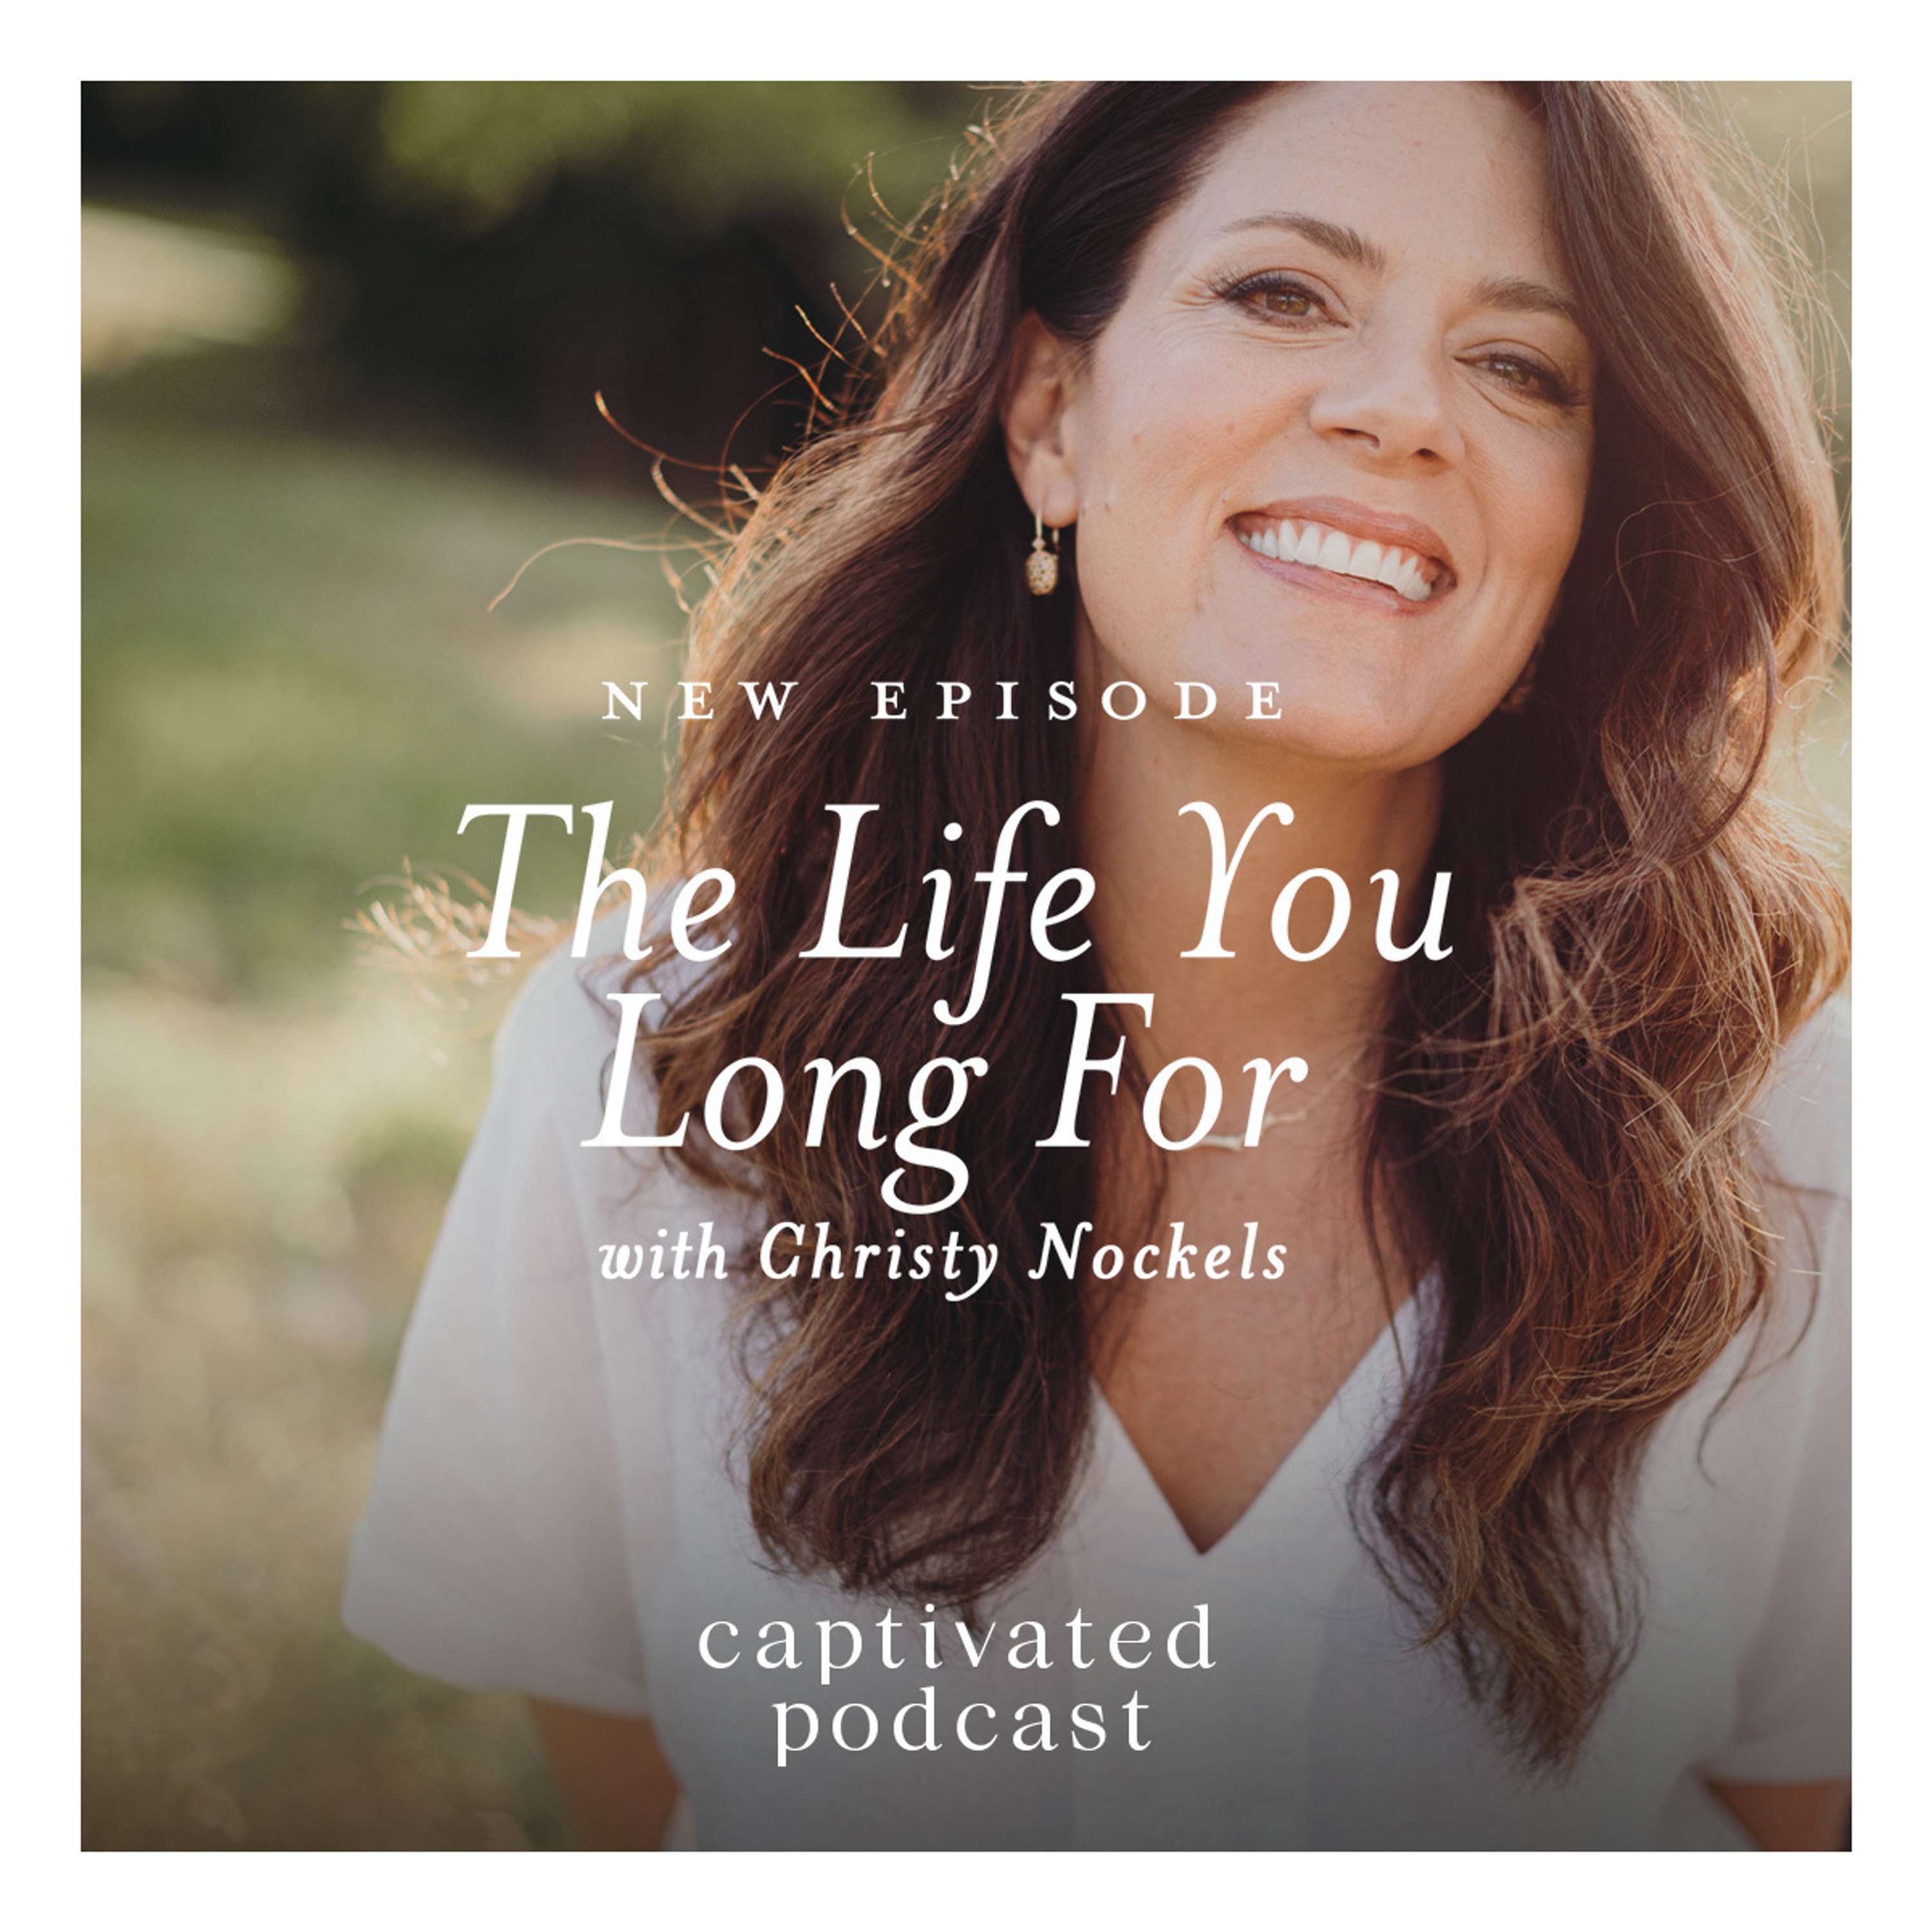 The Life You Long For, with Christy Nockels